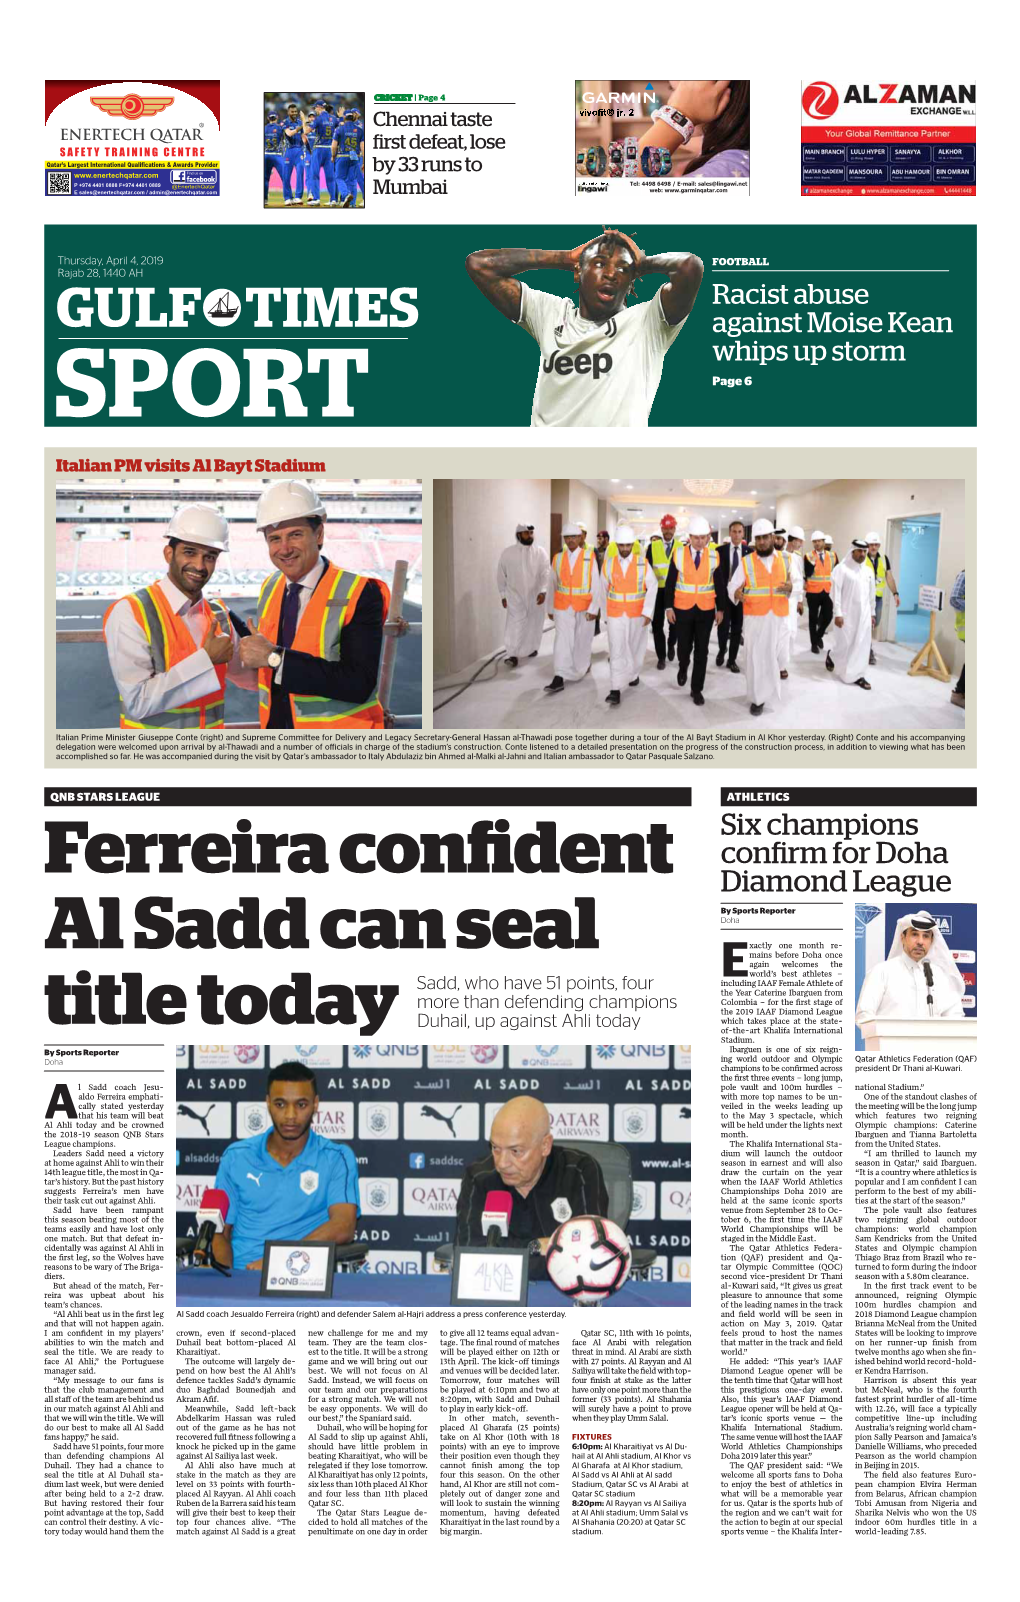 FOOTBALL Rajab 28, 1440 AH Racist Abuse GULF TIMES Against Moise Kean Whips up Storm SPORT Page 6